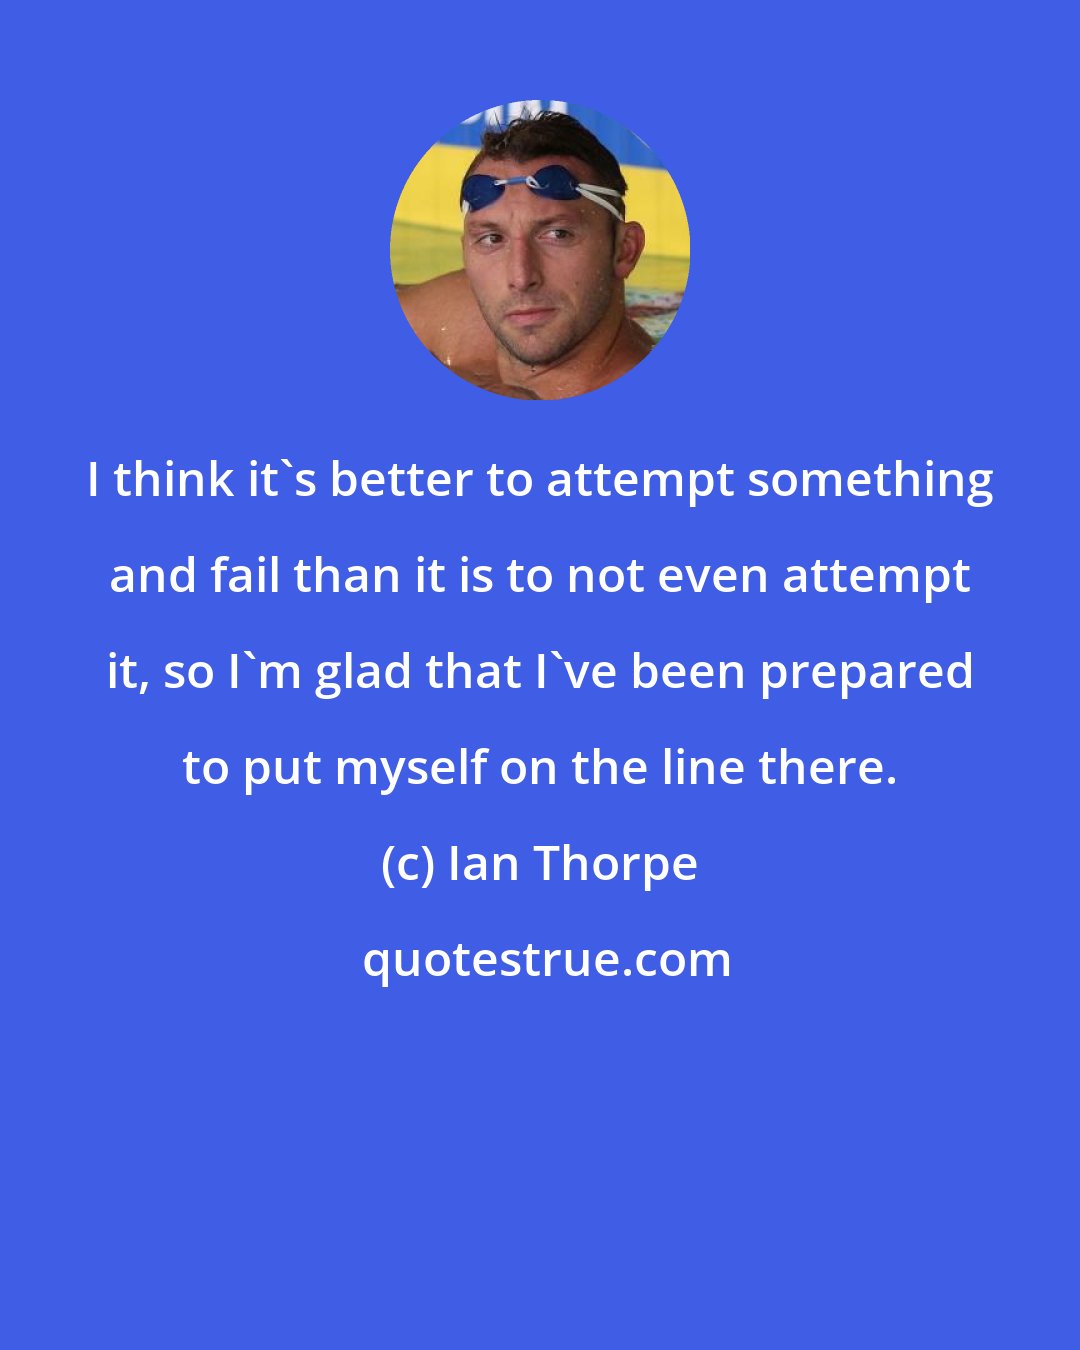 Ian Thorpe: I think it's better to attempt something and fail than it is to not even attempt it, so I'm glad that I've been prepared to put myself on the line there.